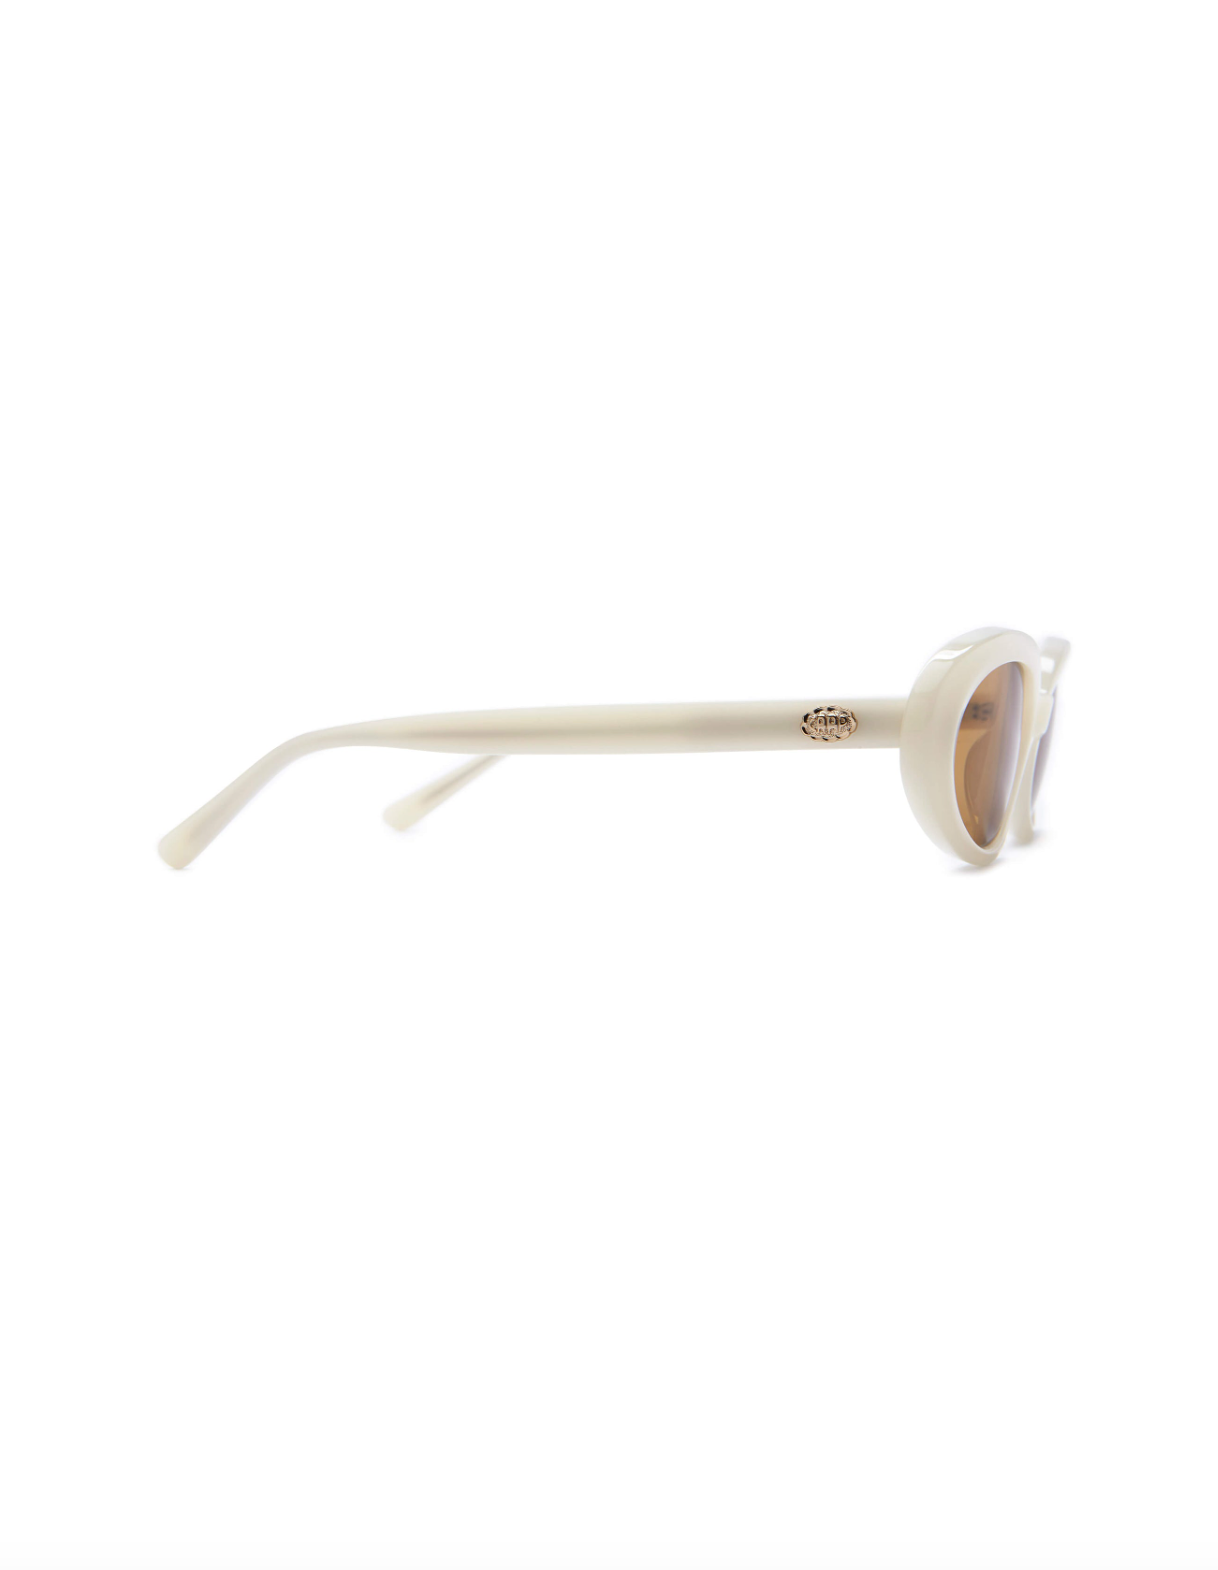 The Sweet Leaf is a small-ish silhouette that flatters a variety of head sizes. Its thin, adjustable temples allow for a more universal fit. Handcrafted bioacetate frames—biodegradable, plant-based, earth-friendlier. Rx-ready.